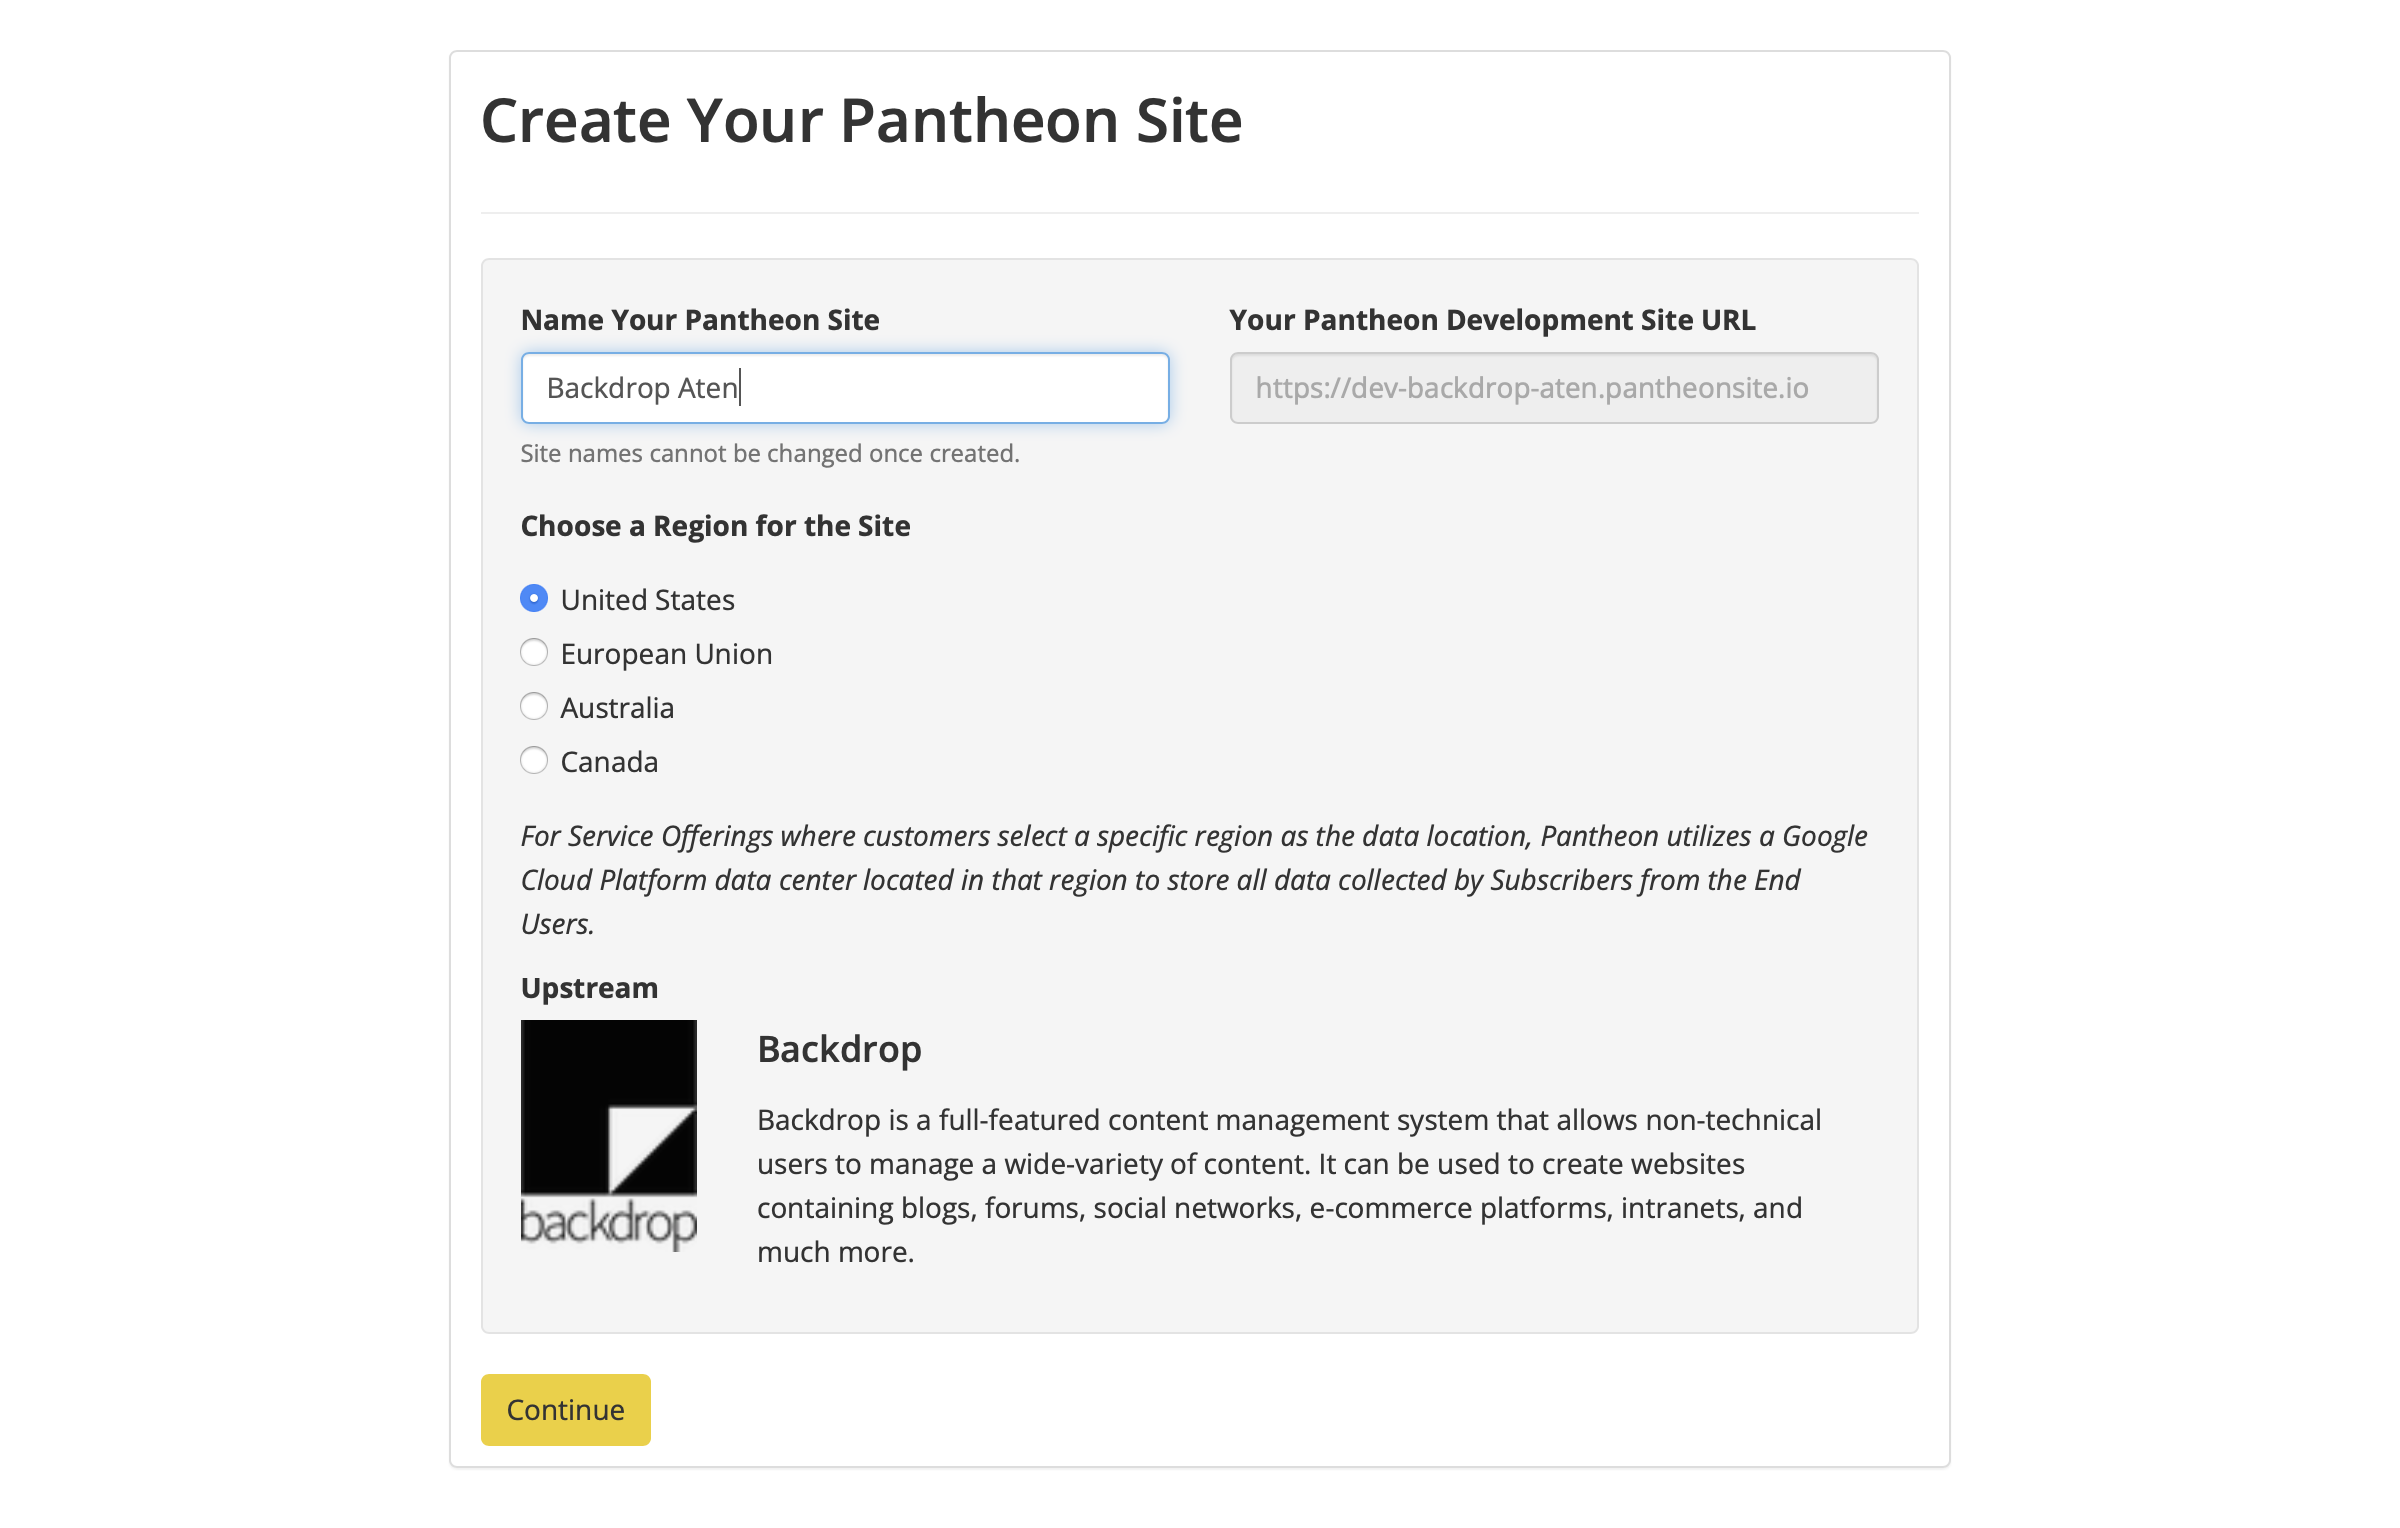 Backdrop on Pantheon: Add a site